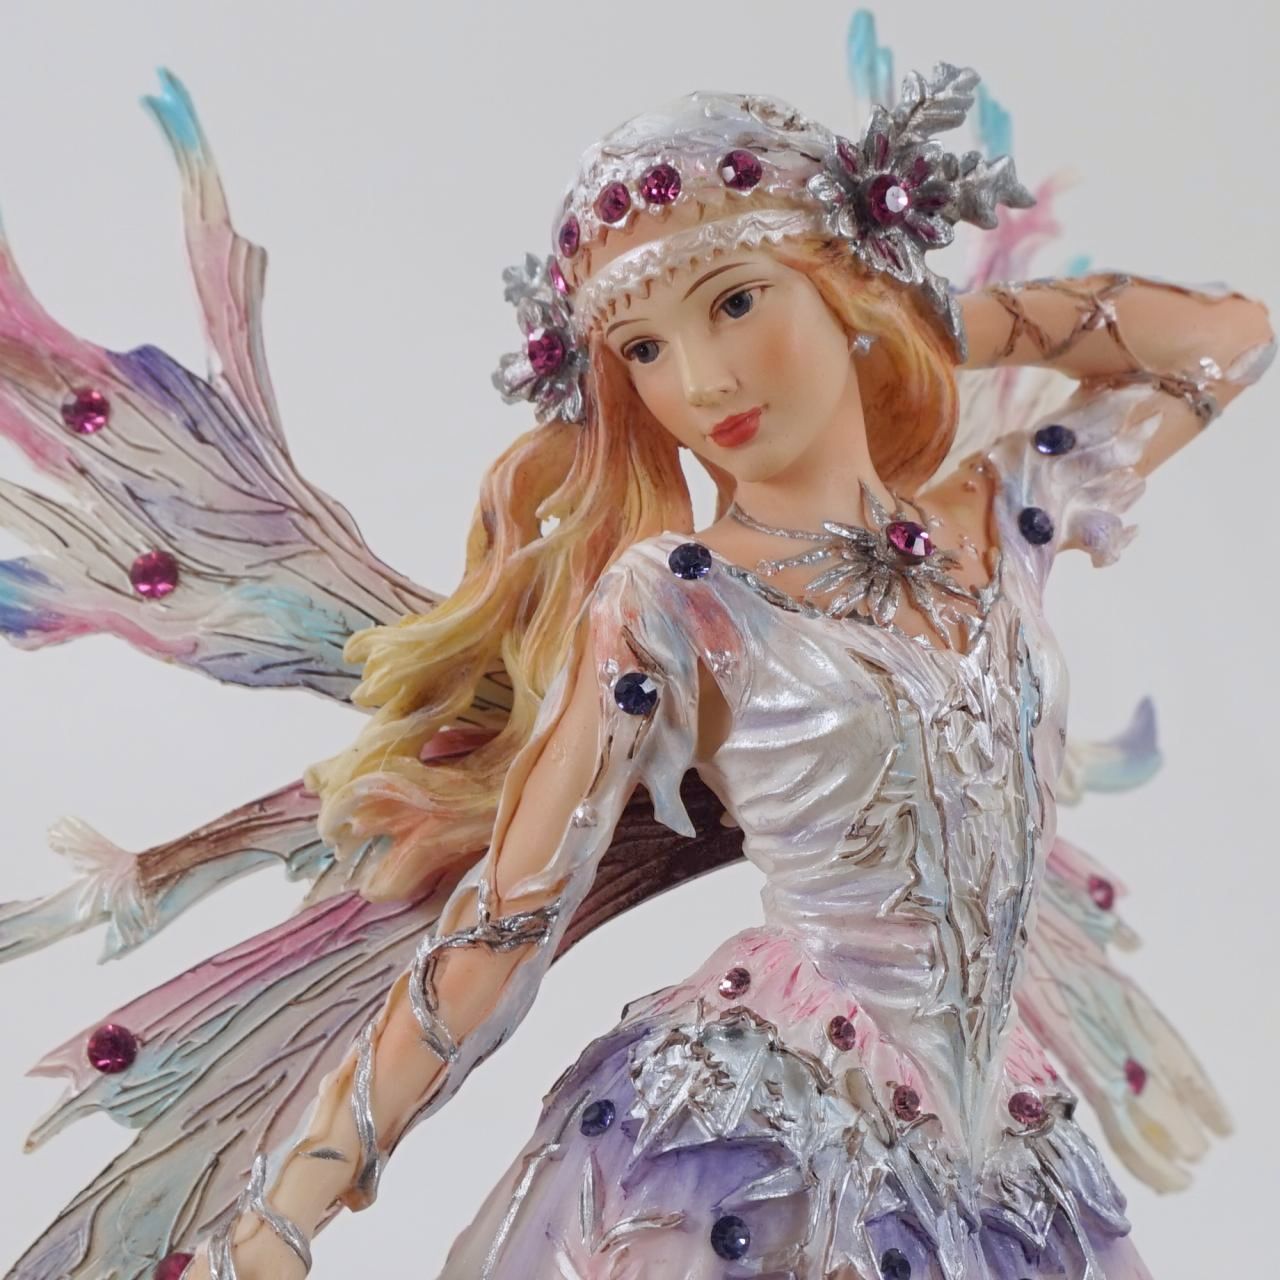 Crisalis Collection★ Ice Princess Faerie (1-5321) Signed